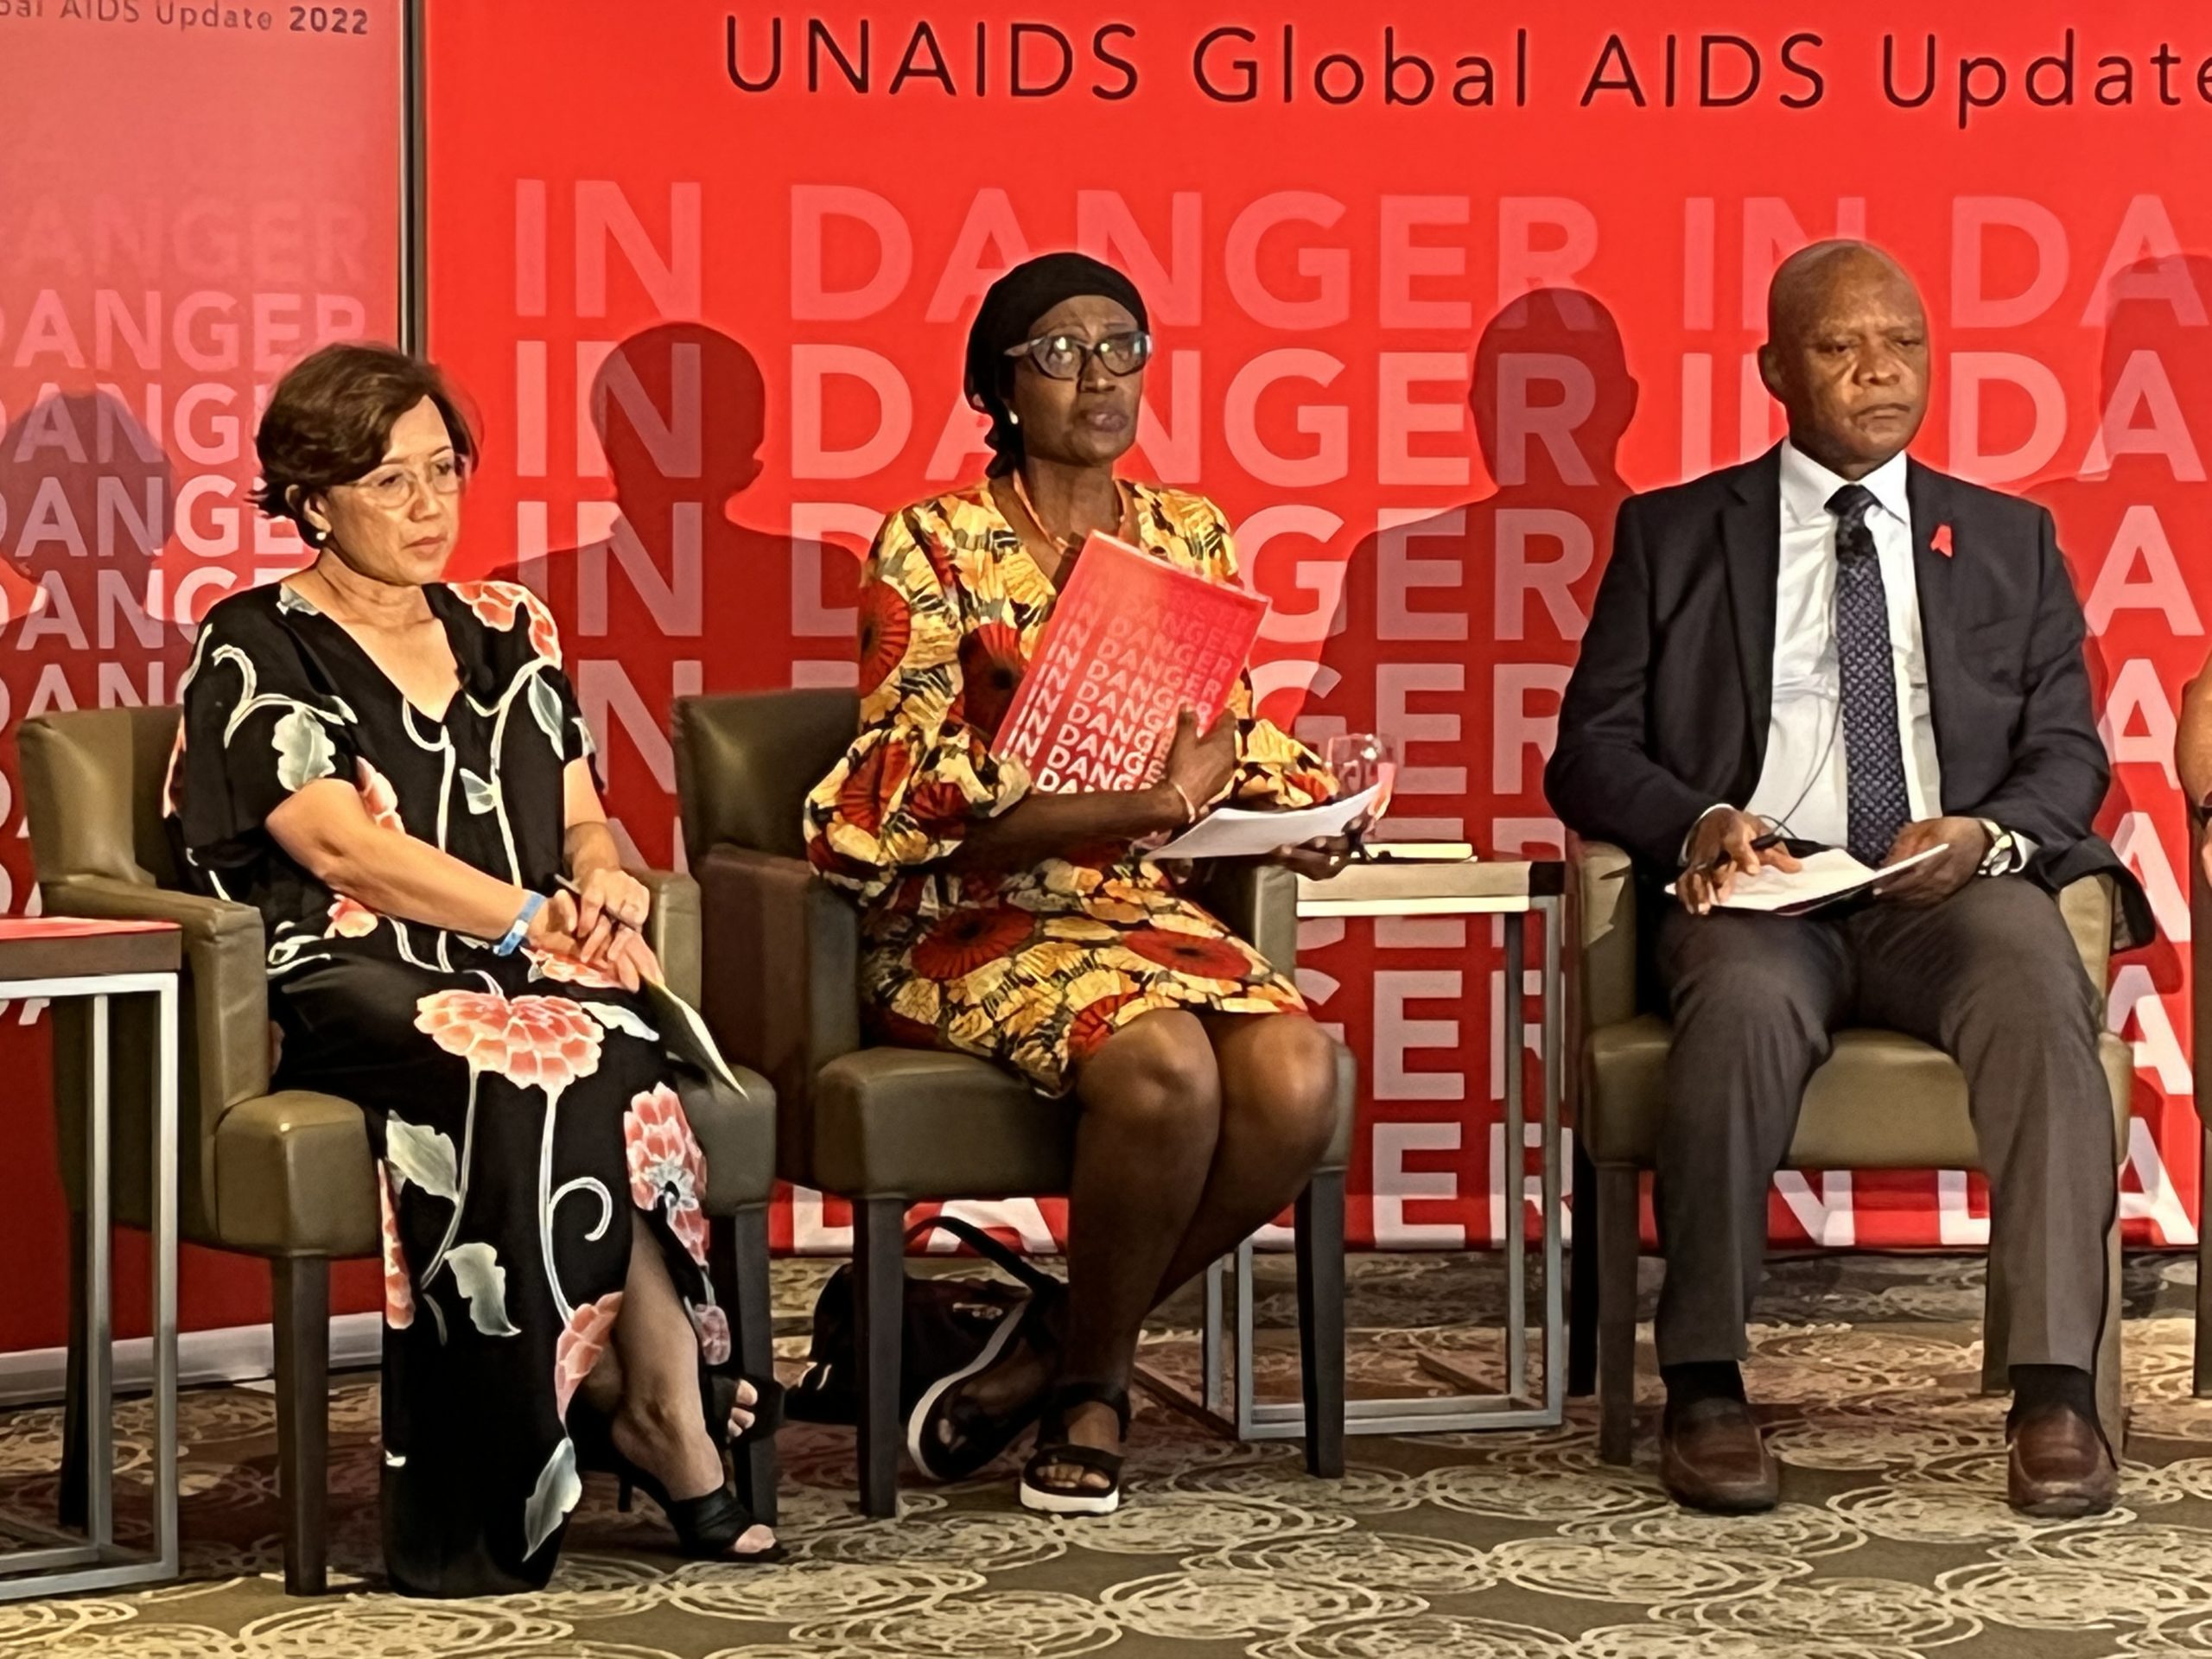 UNAIDS: COVID-19 and Plummeting Donor Funds Slow Progress Against HIV